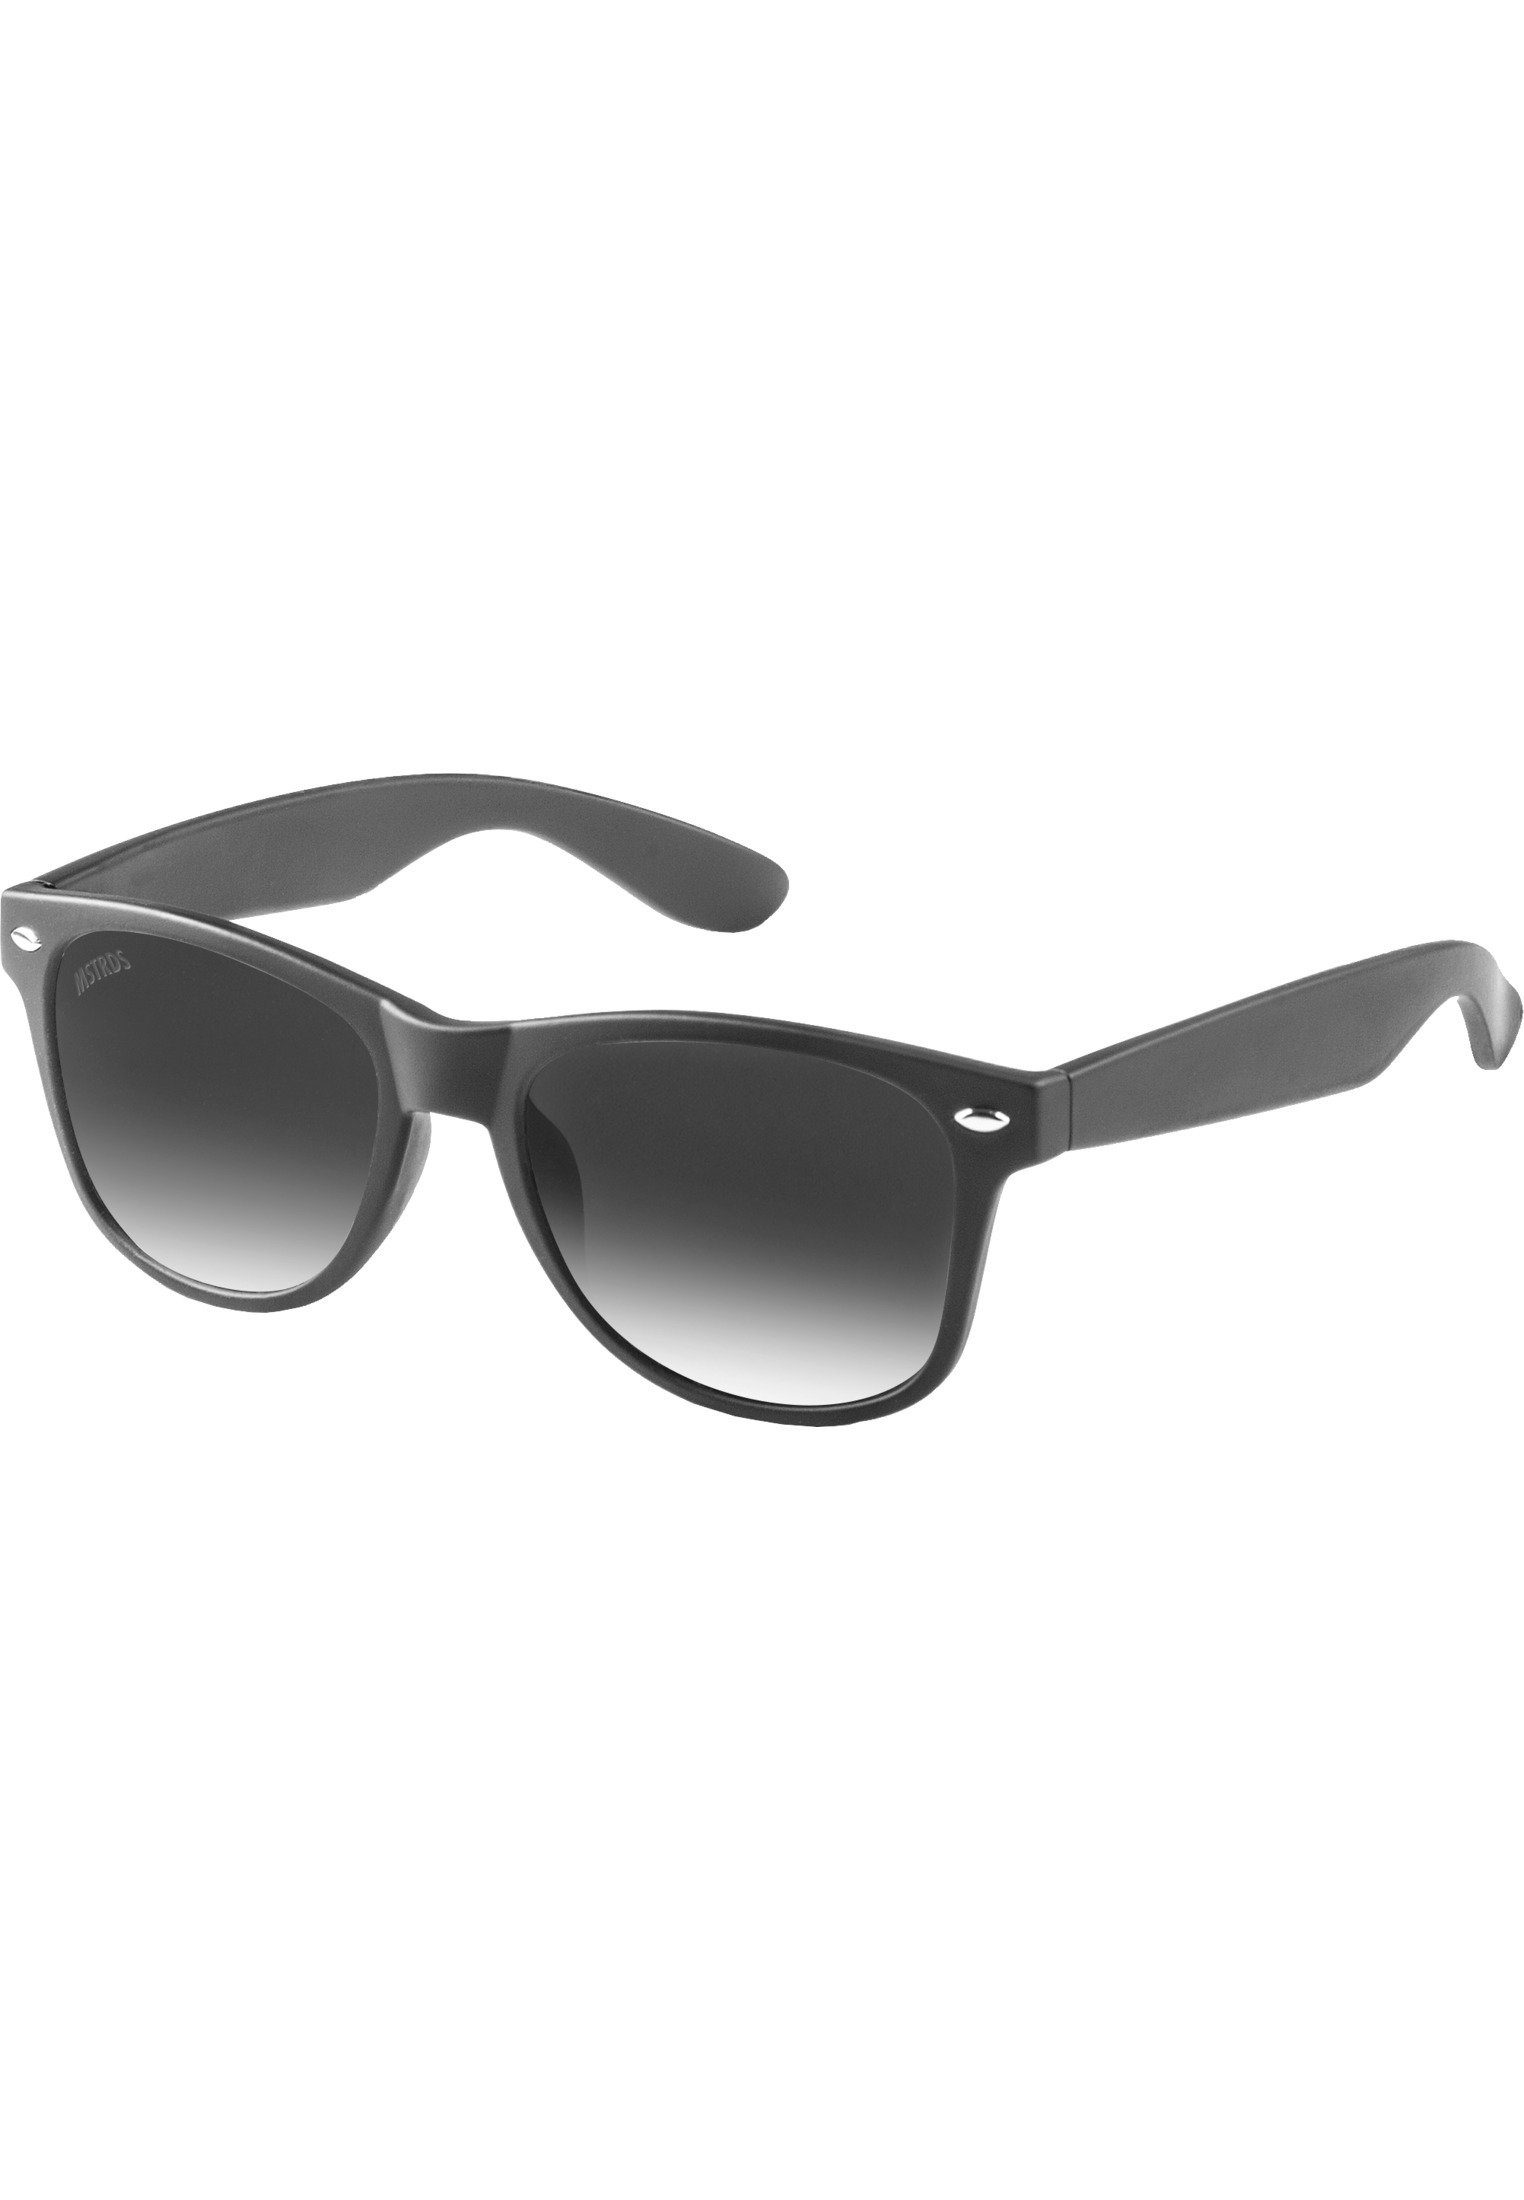 Accessoires Sonnenbrille blk/gry Youth MSTRDS Sunglasses Likoma